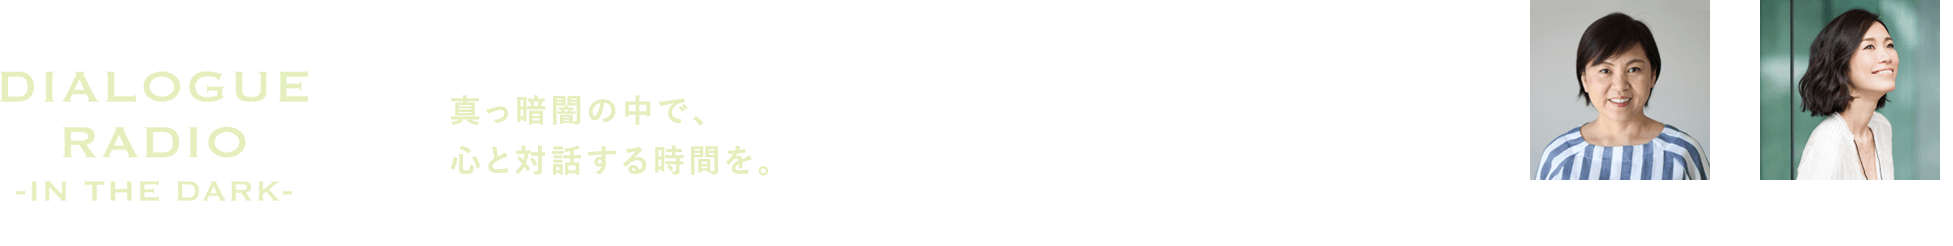 DIALOGUE RADIO -IN THE DARK- 真っ暗闇の中で、心と対話する時間を。 DIALOGUE RADIO -IN THE DARK- EVERY SECOND SUNDAY 81.3 J-WAVE 25:00-26:00 ON AIR 志村 季世恵 バースセラピスト 板井 麻衣子 J-WAVE NAVIGATOR